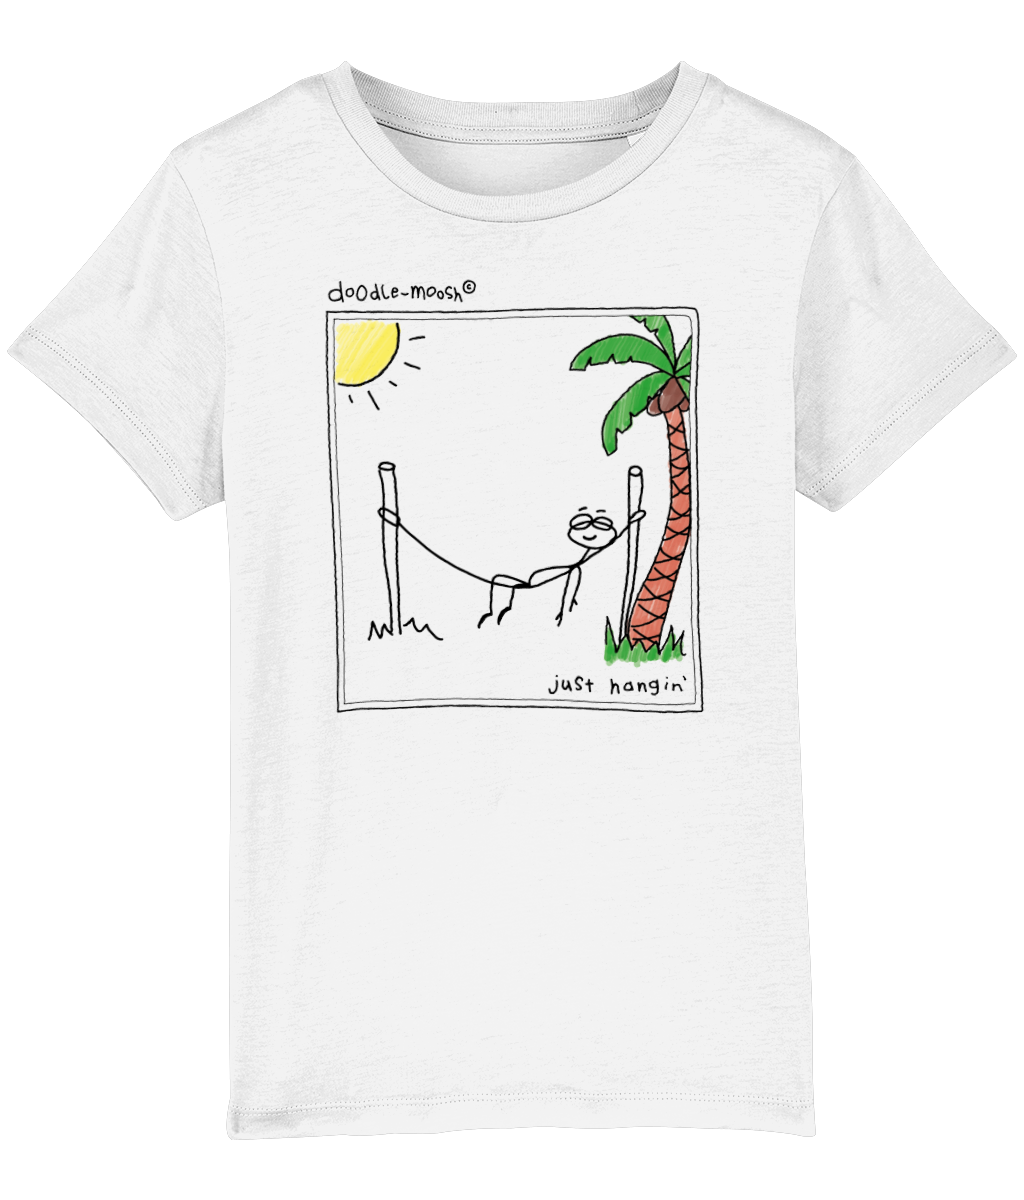 Just hanging t-shirt, white with black, colourful drawing